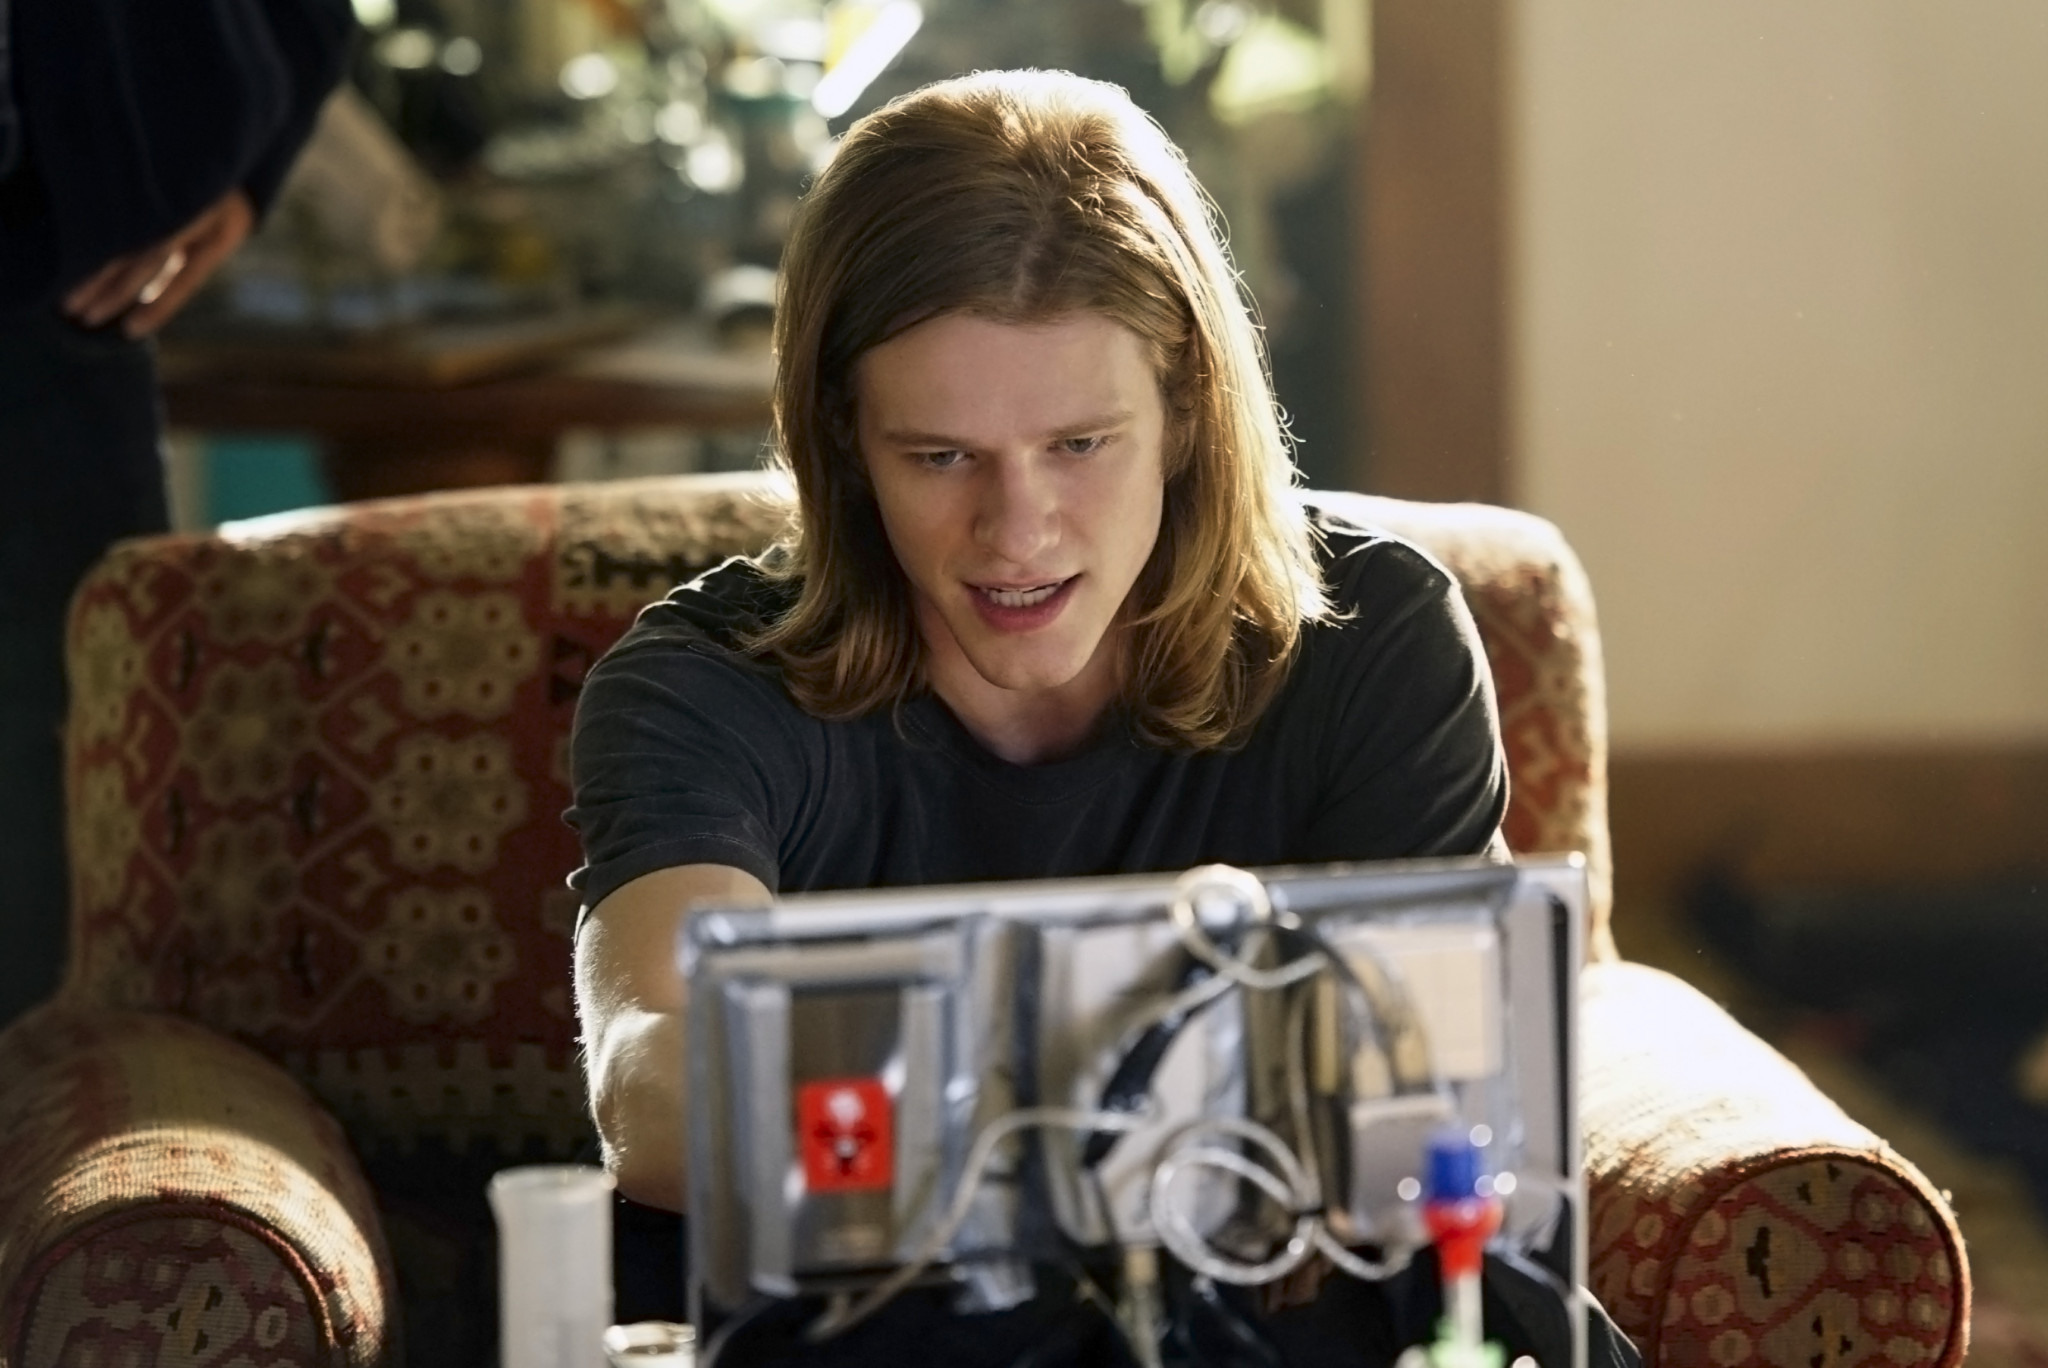 MACGYVER, a reimagining of the classic series, is an action-adventure drama about 20-something Angus ÒMacÓ MacGyver (Lucas Till, pictured) who creates a clandestine organization within the U.S. government where he uses his extraordinary talent for unconventional problem solving and vast scientific knowledge to save lives. Under the aegis of the Department of External Affairs, MacGyver takes on the responsibility of saving the world, armed to the teeth with resourcefulness and little more than bubble gum and a paper clip. Photo: Ron P. Jaffe/CBS ©2016 CBS Broadcasting, Inc. All Rights Reserved